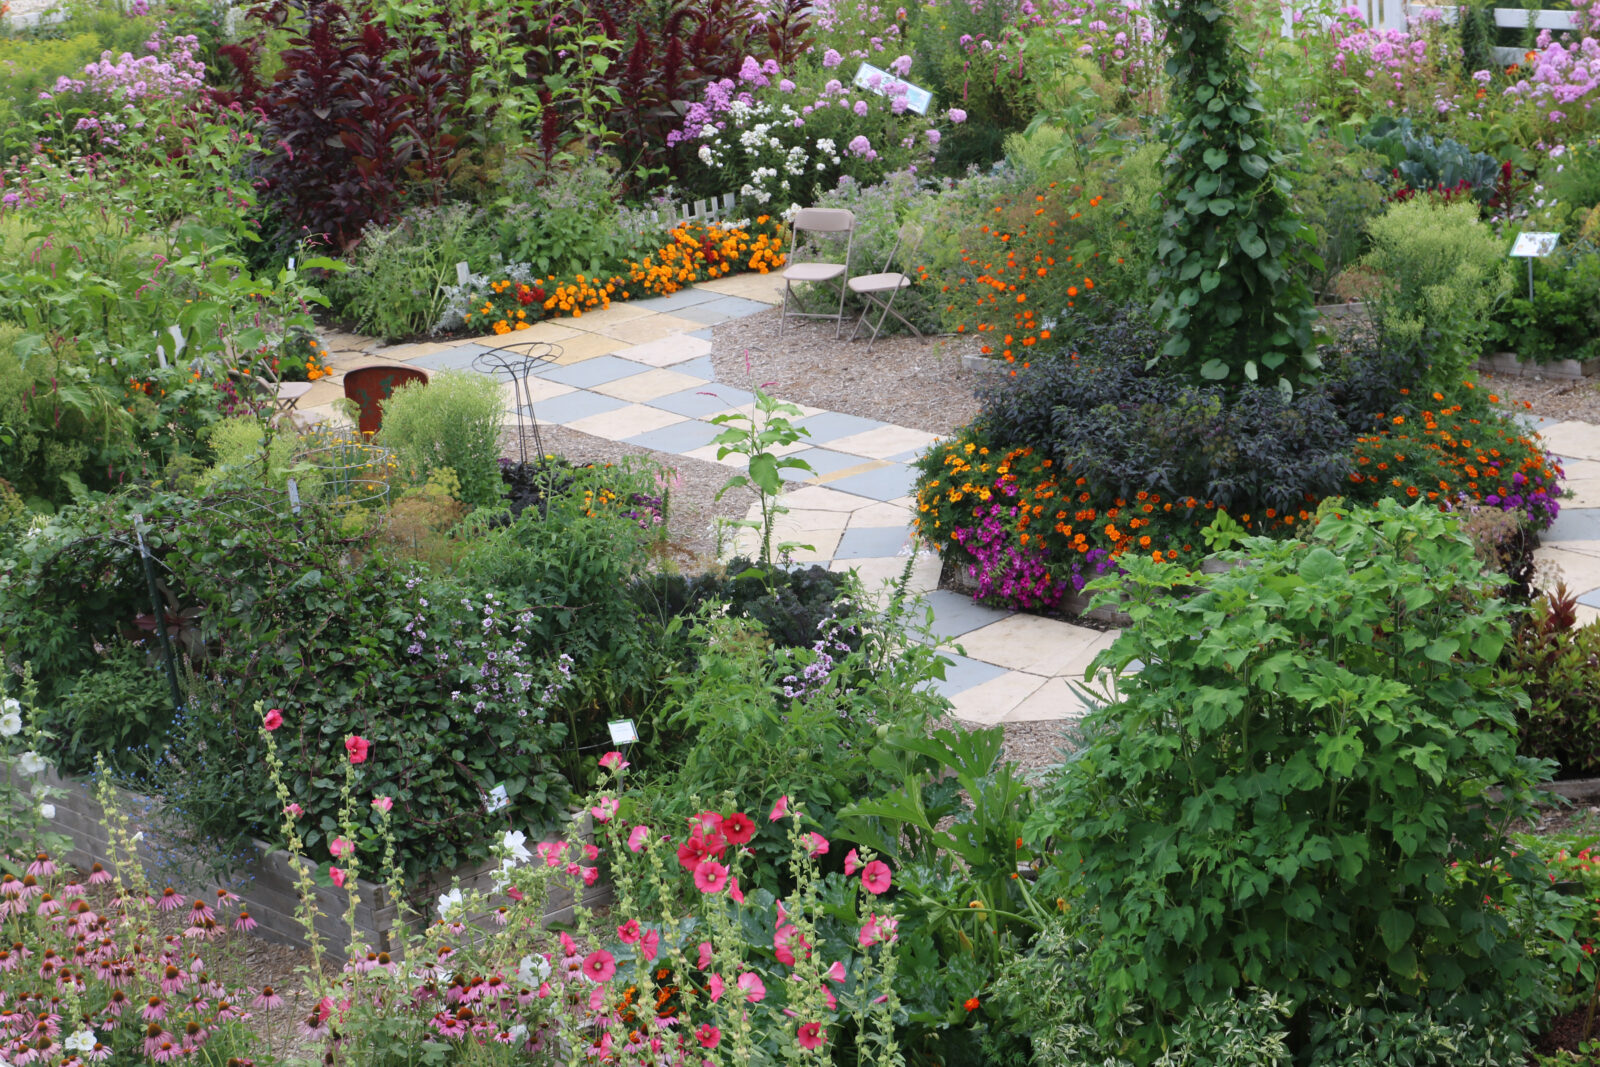 A beautiful lush garden with many plant varieties